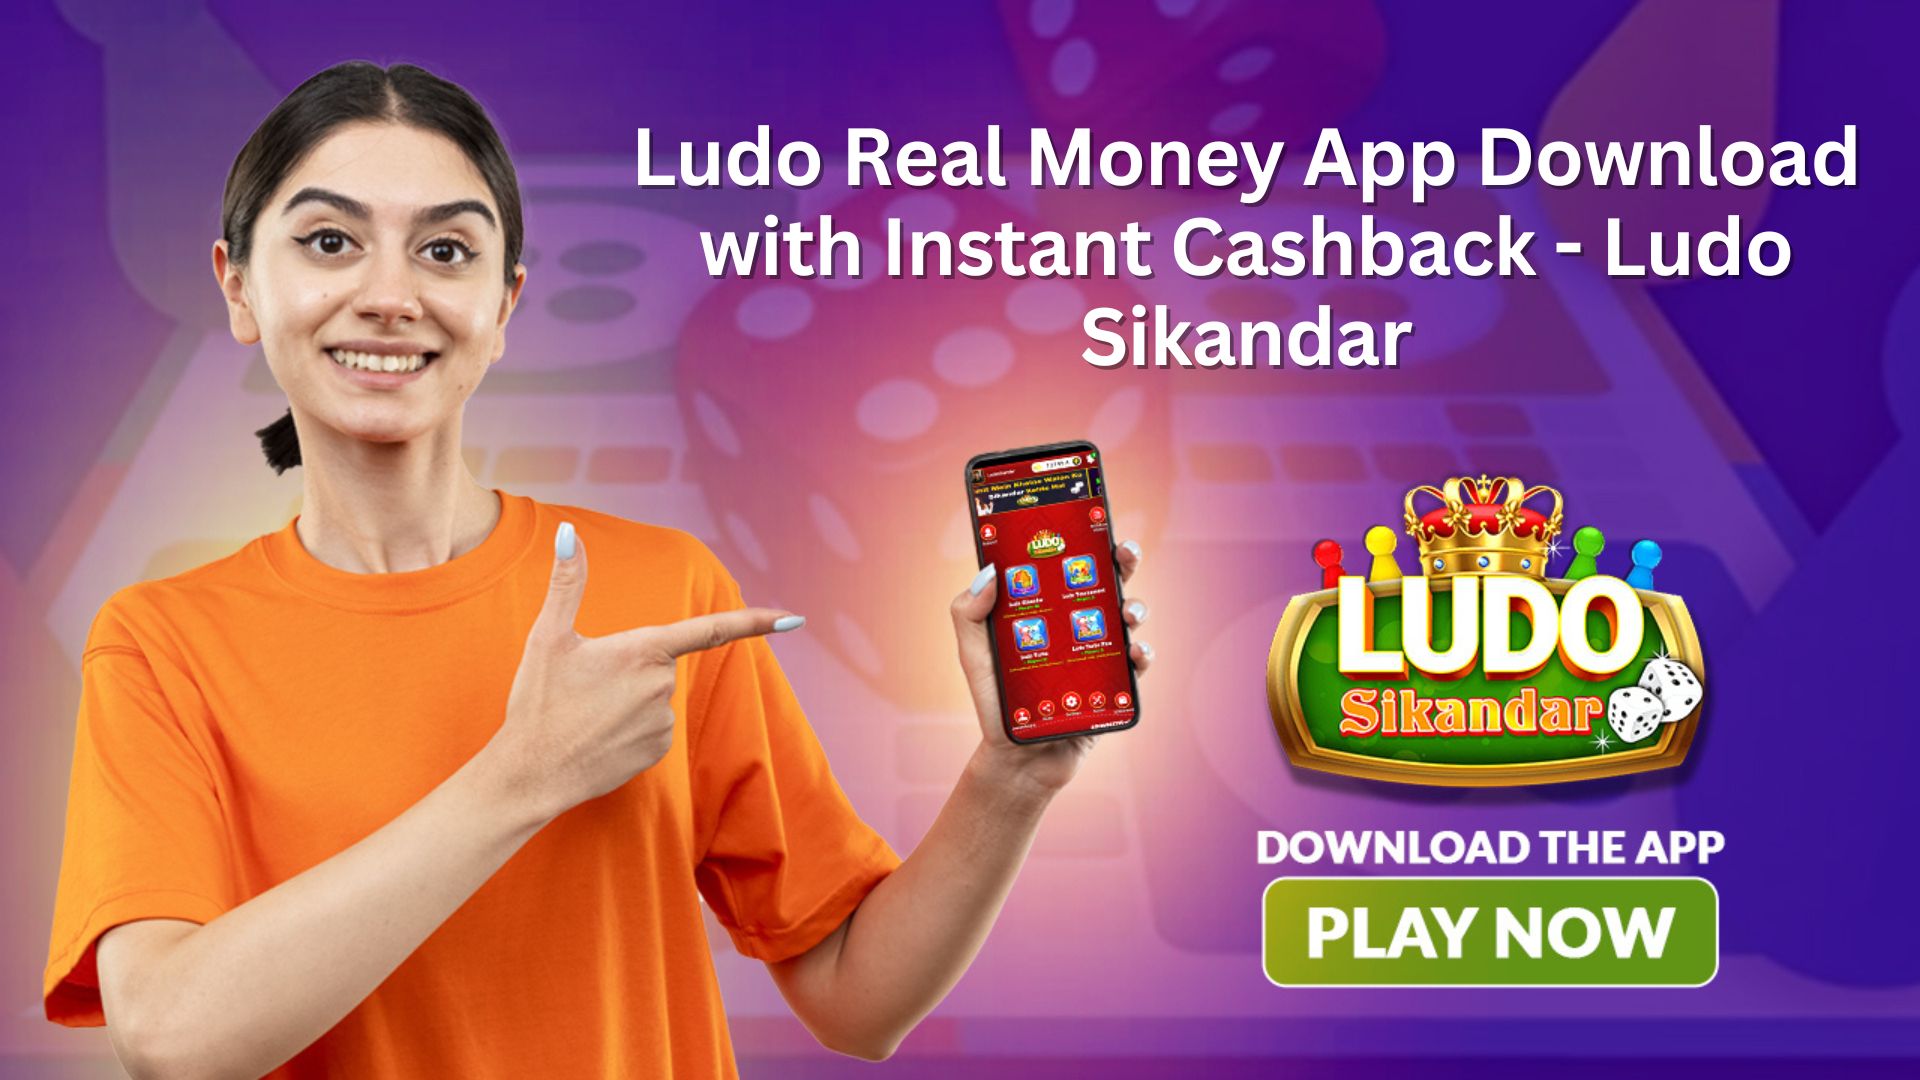 Ludo Real Money App Download with Instant Cashback - Ludo Sikandar